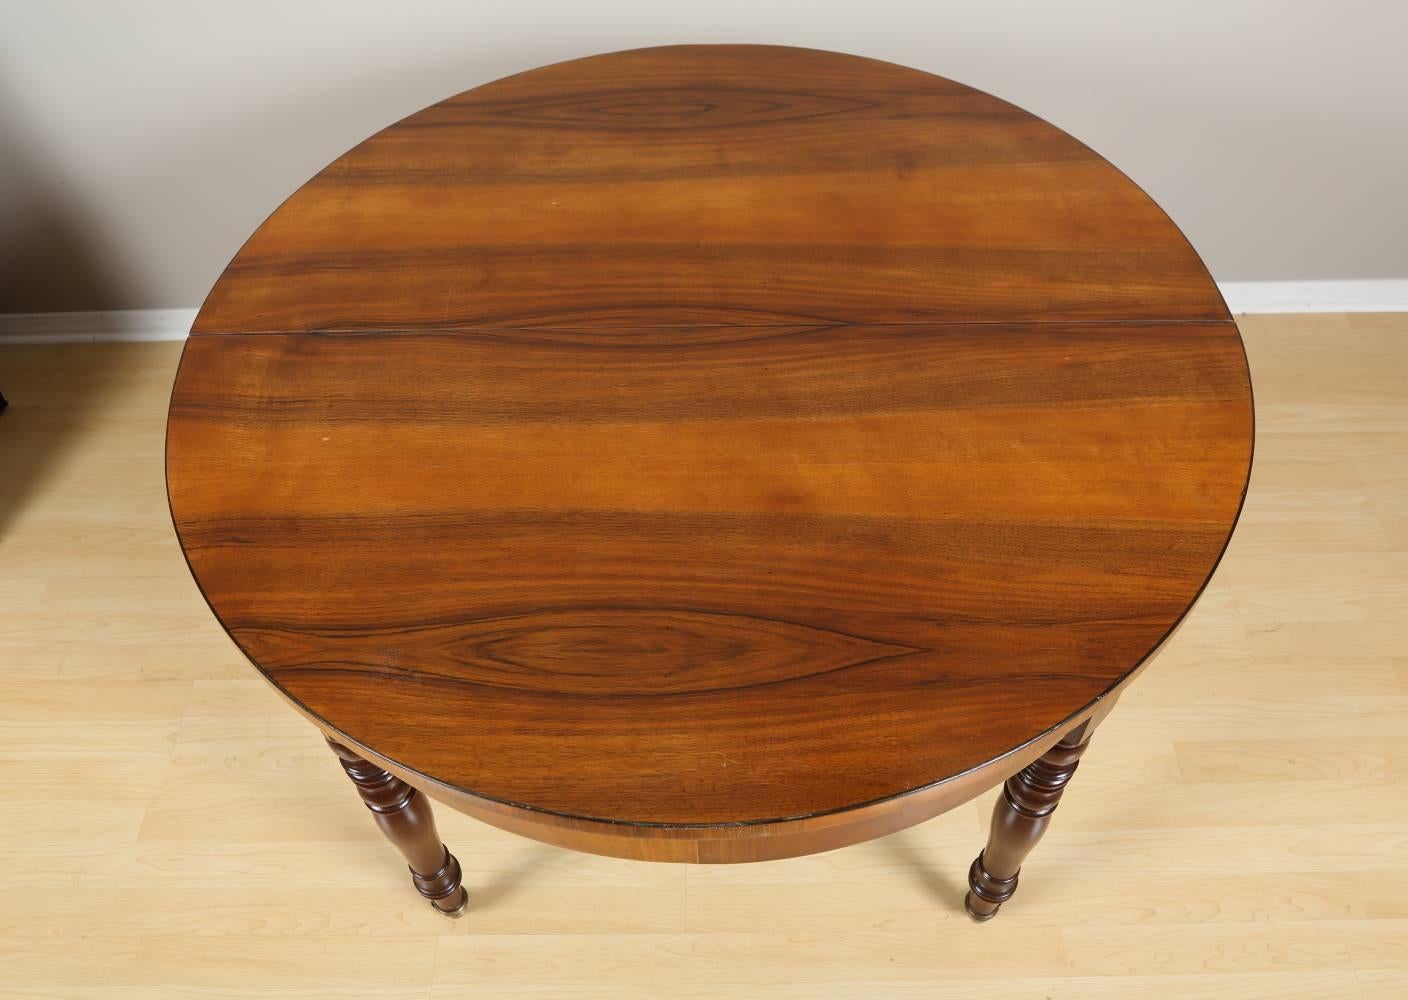 Biedermeier extending dining table, circa 1850 from Germany. This spectacular walnut dining table features beautifully veneered top resting on elegantly rounded legs finished off with small casters. The table includes four leafs at 19.5